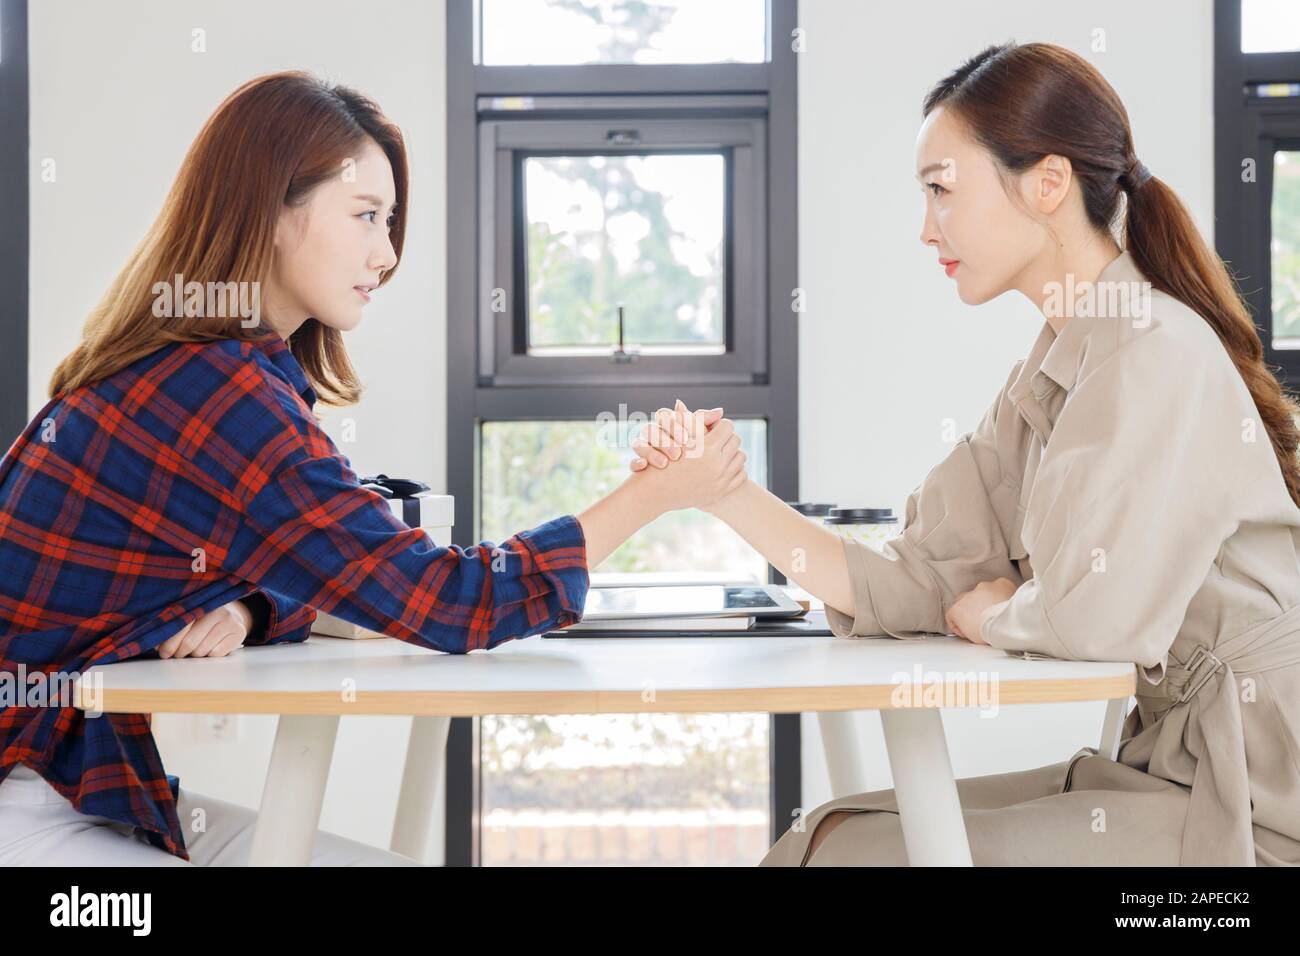 Business people concept, working and discussing together in office 132 Stock Photo